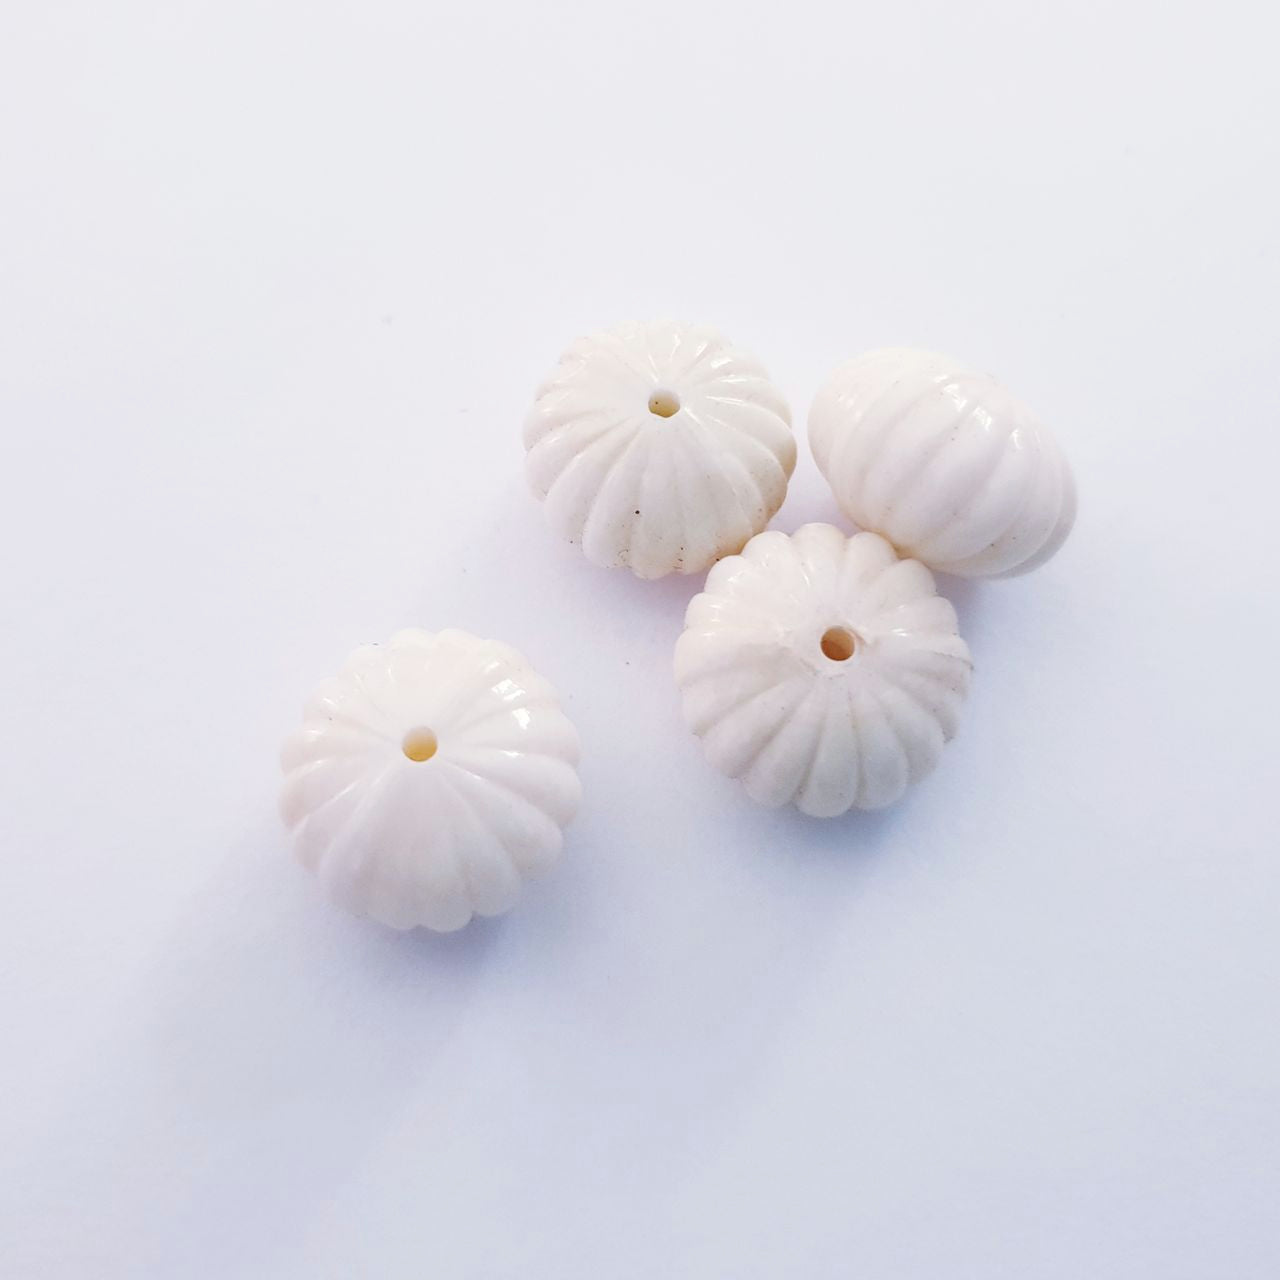 Lucite Bead Ivory Grooved Scalloped Melon 10x14mm Small